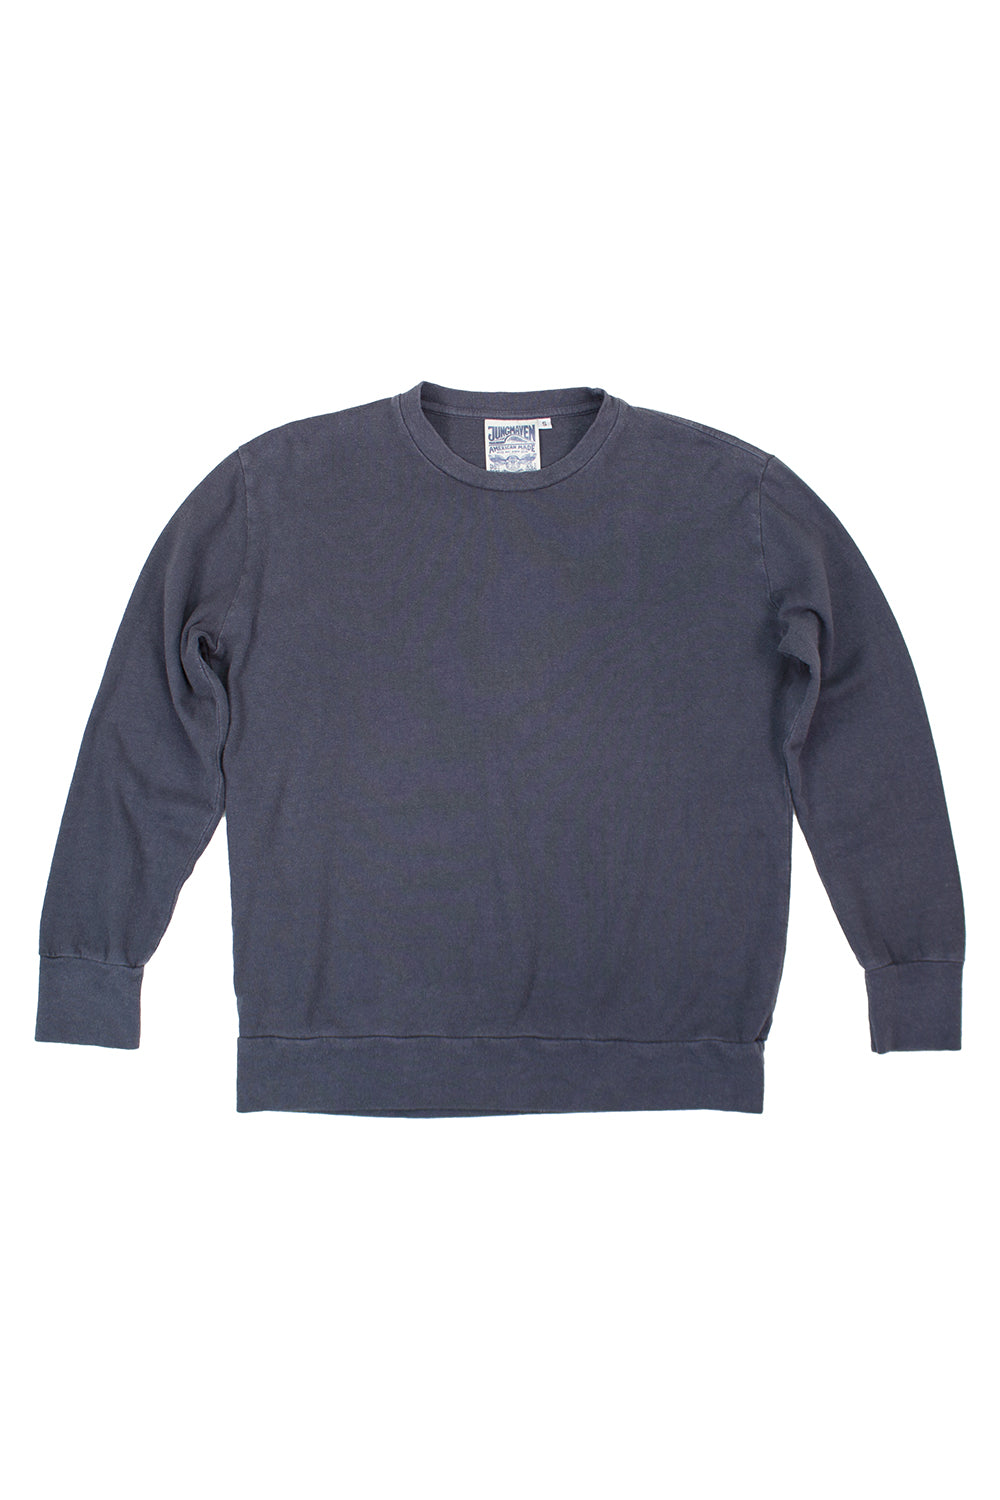 California Pullover | Jungmaven Hemp Clothing & Accessories / Color: Diesel Gray